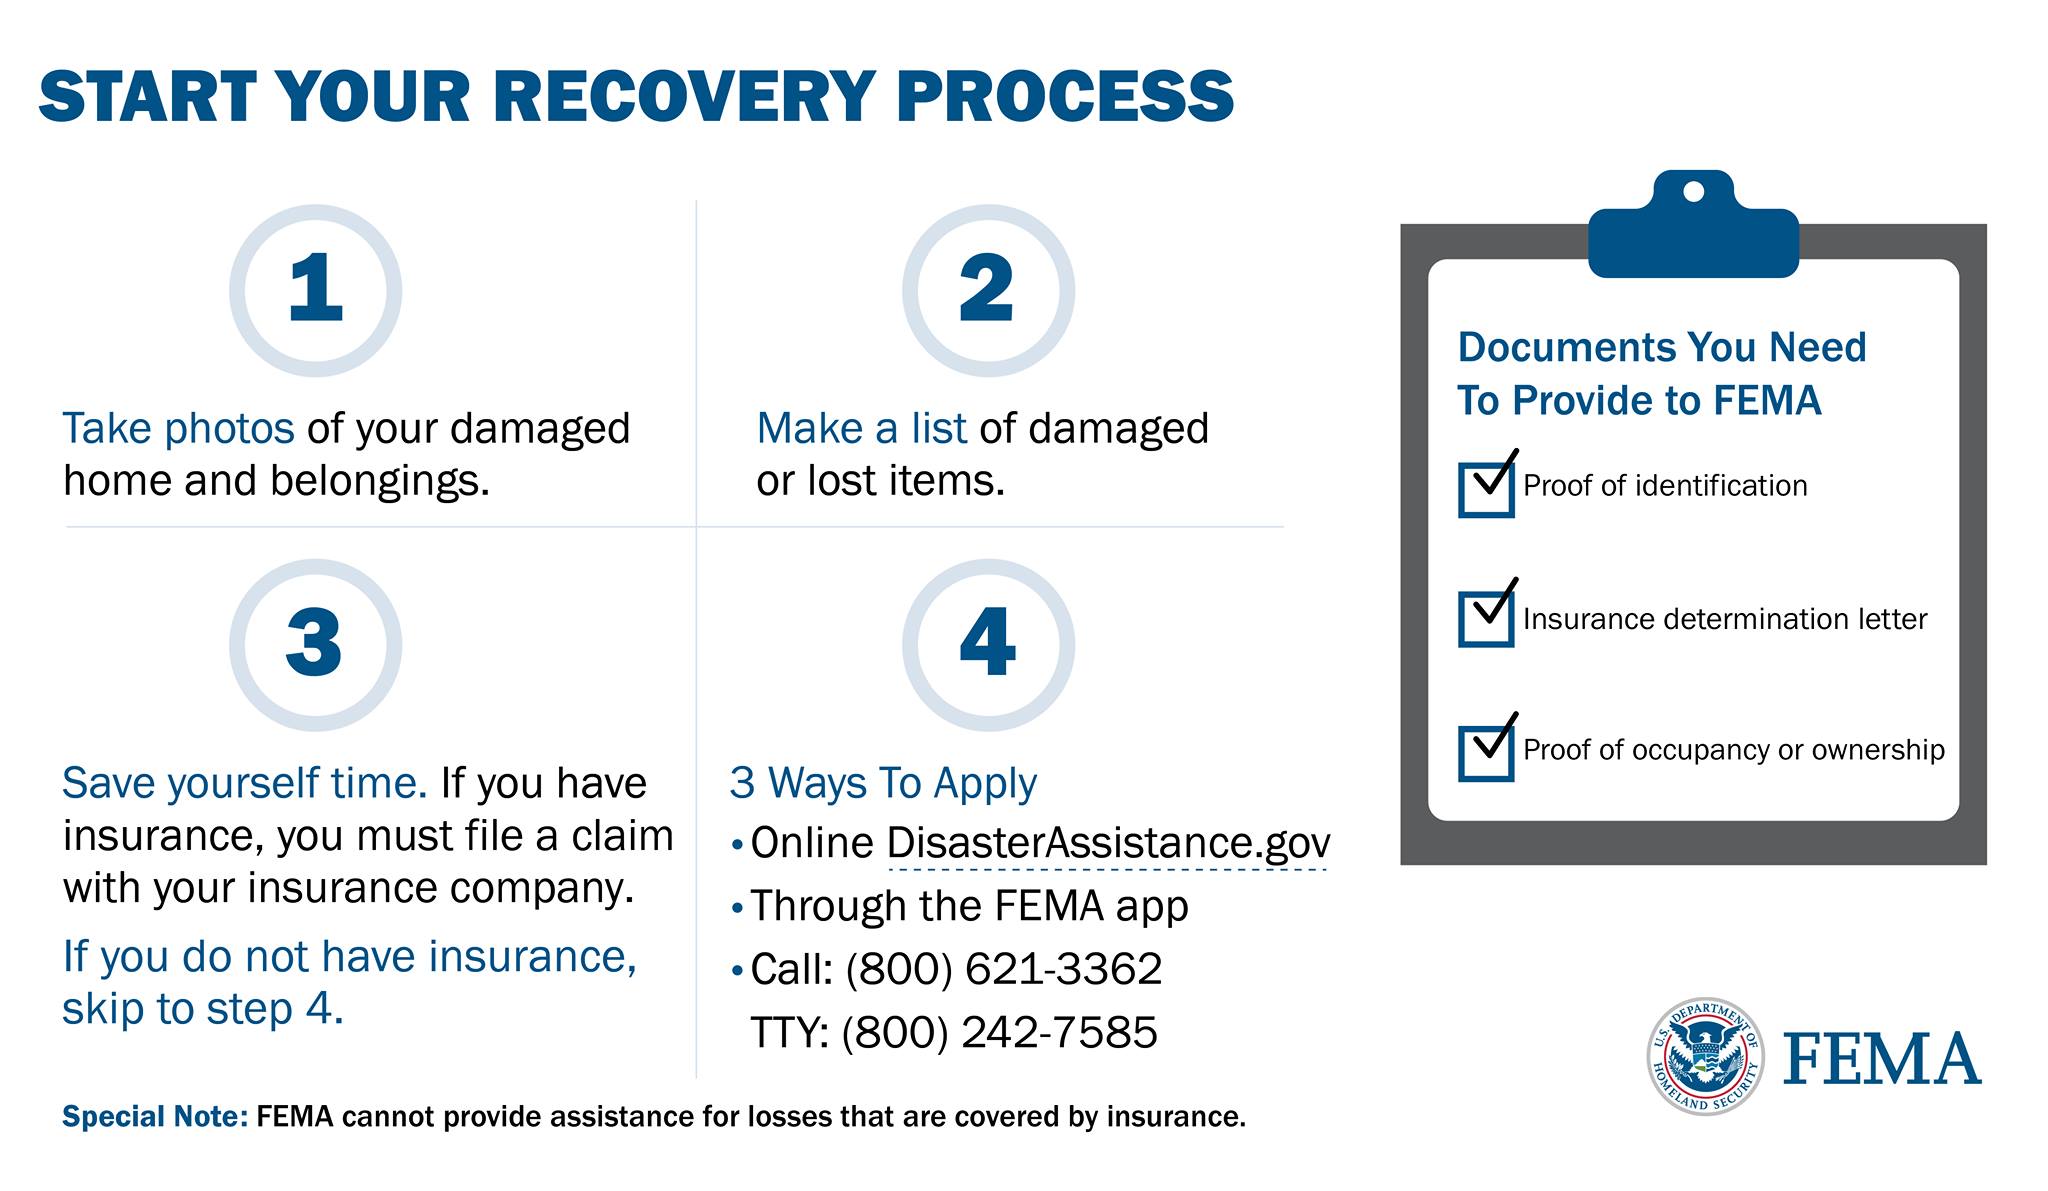 Recovery Process graphic - details and text of the graphic listed below